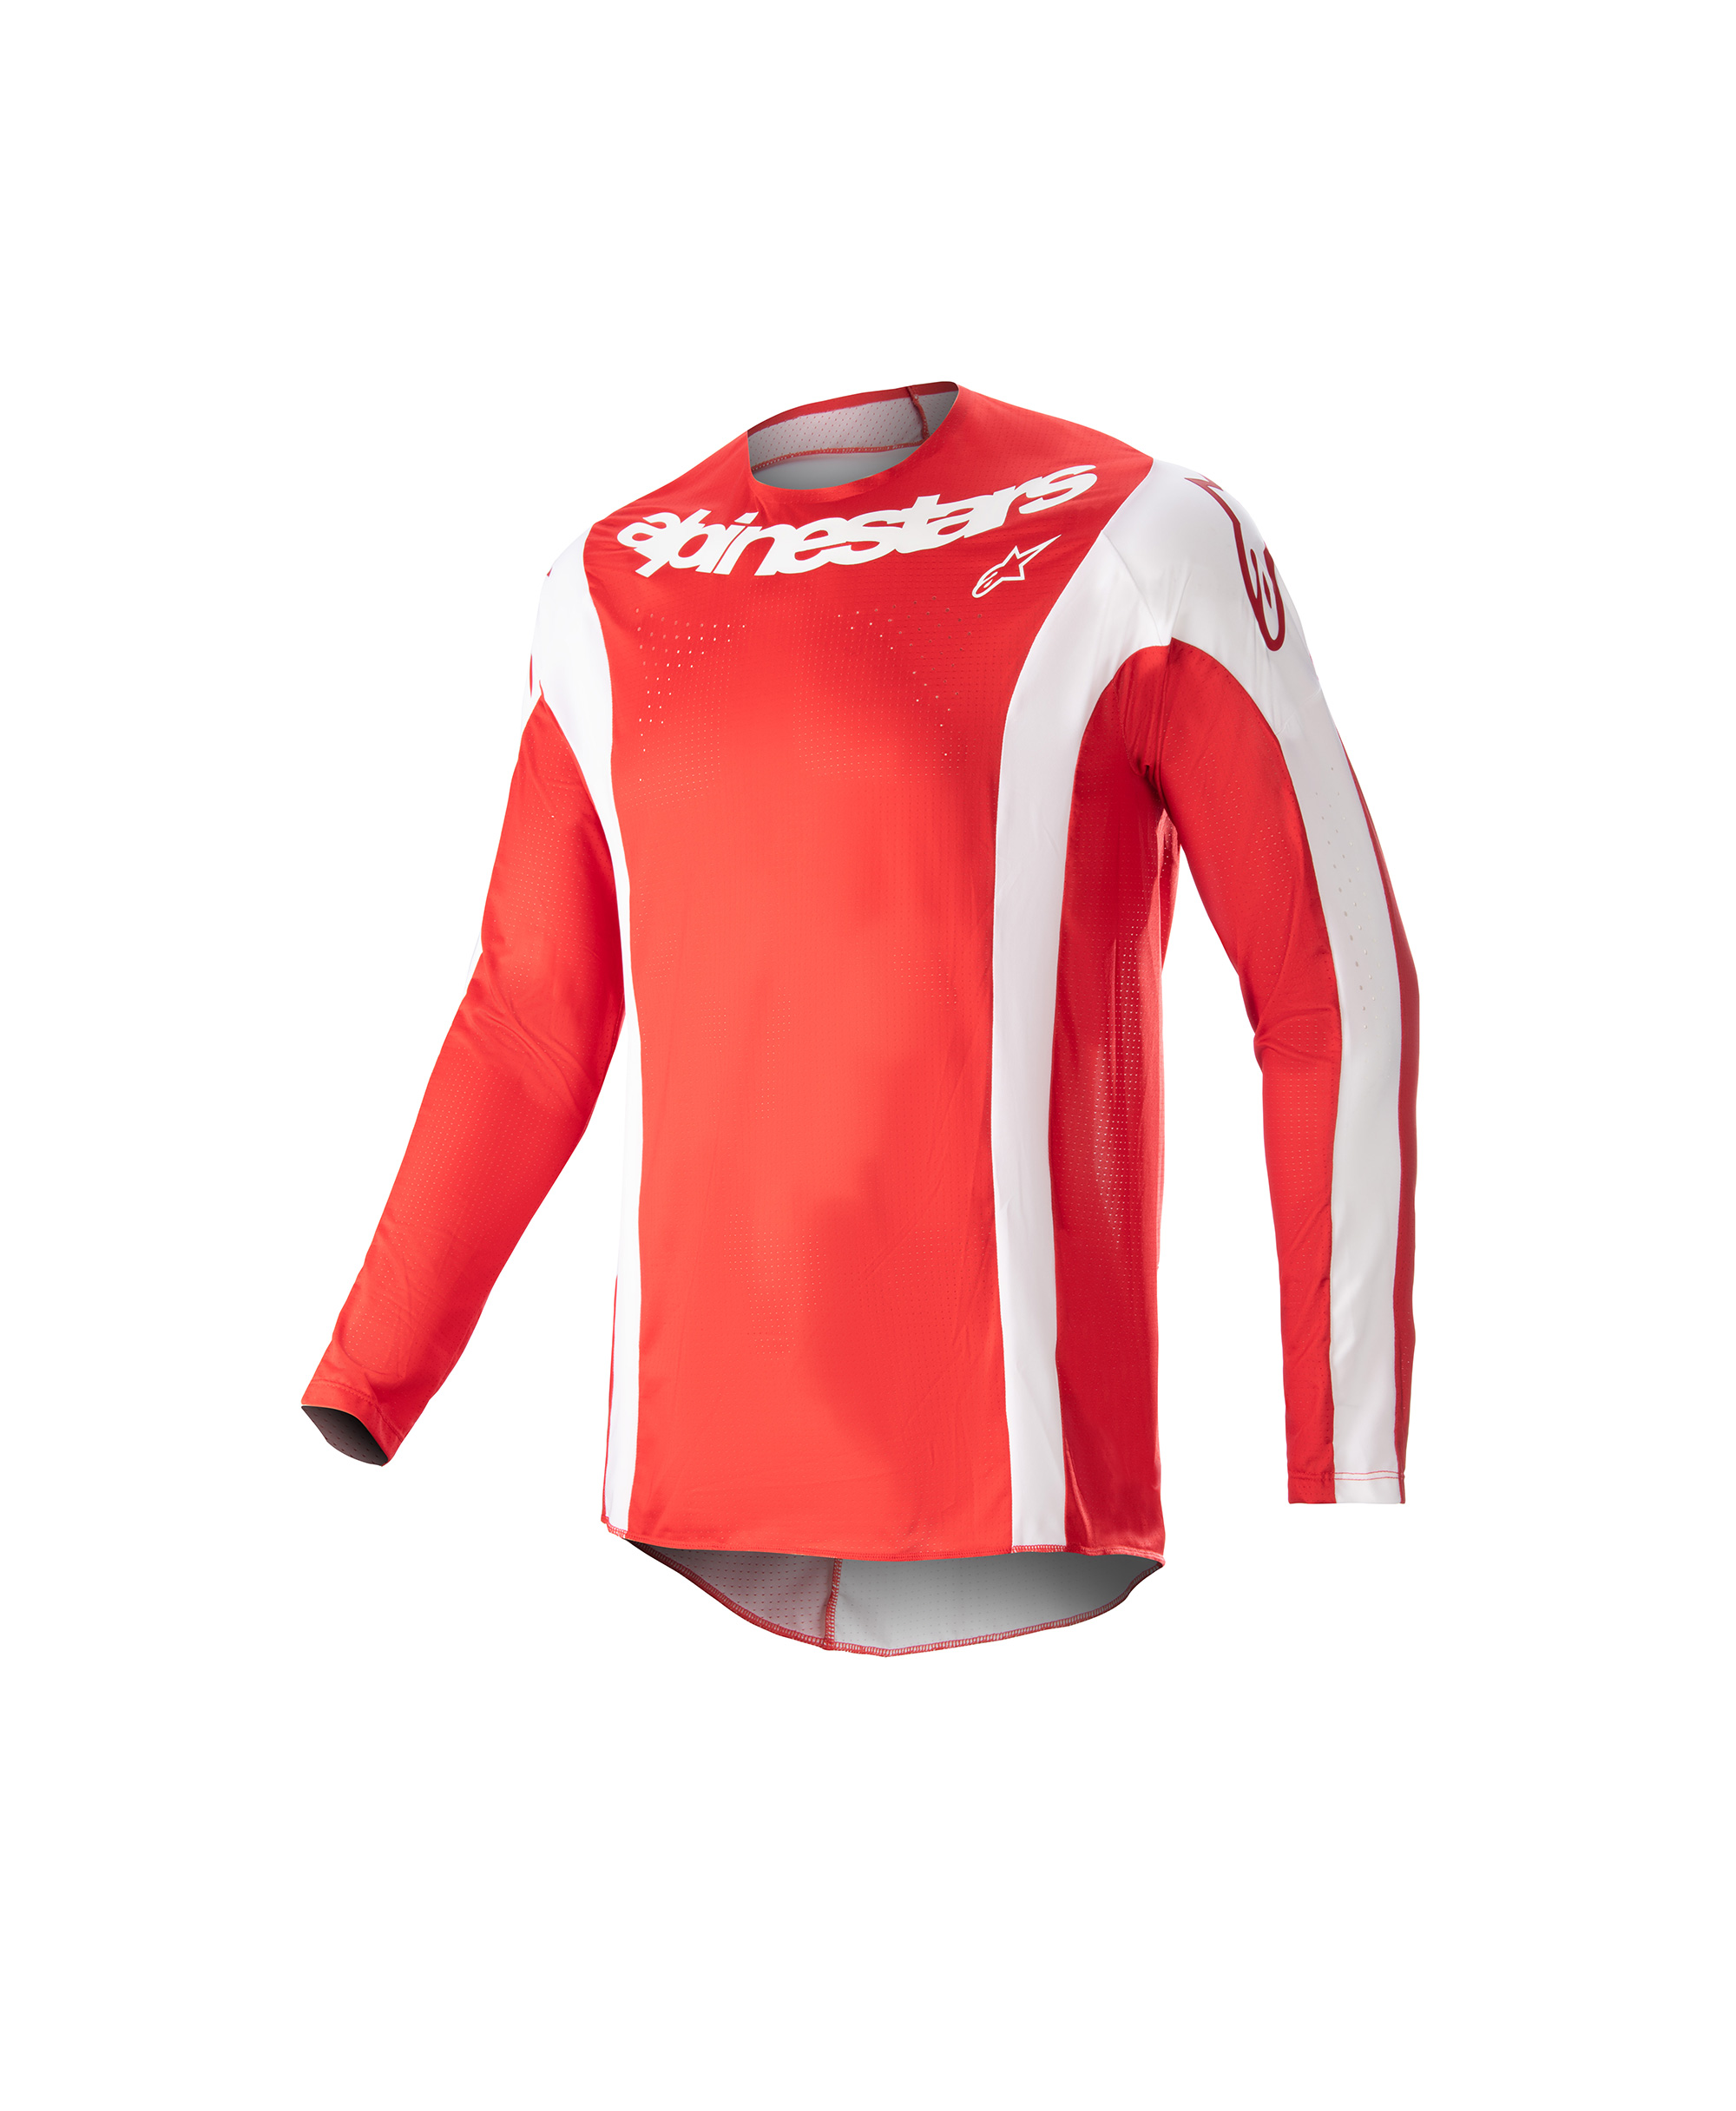 TECHSTAR ARCH JERSEY MARS RED WHITE